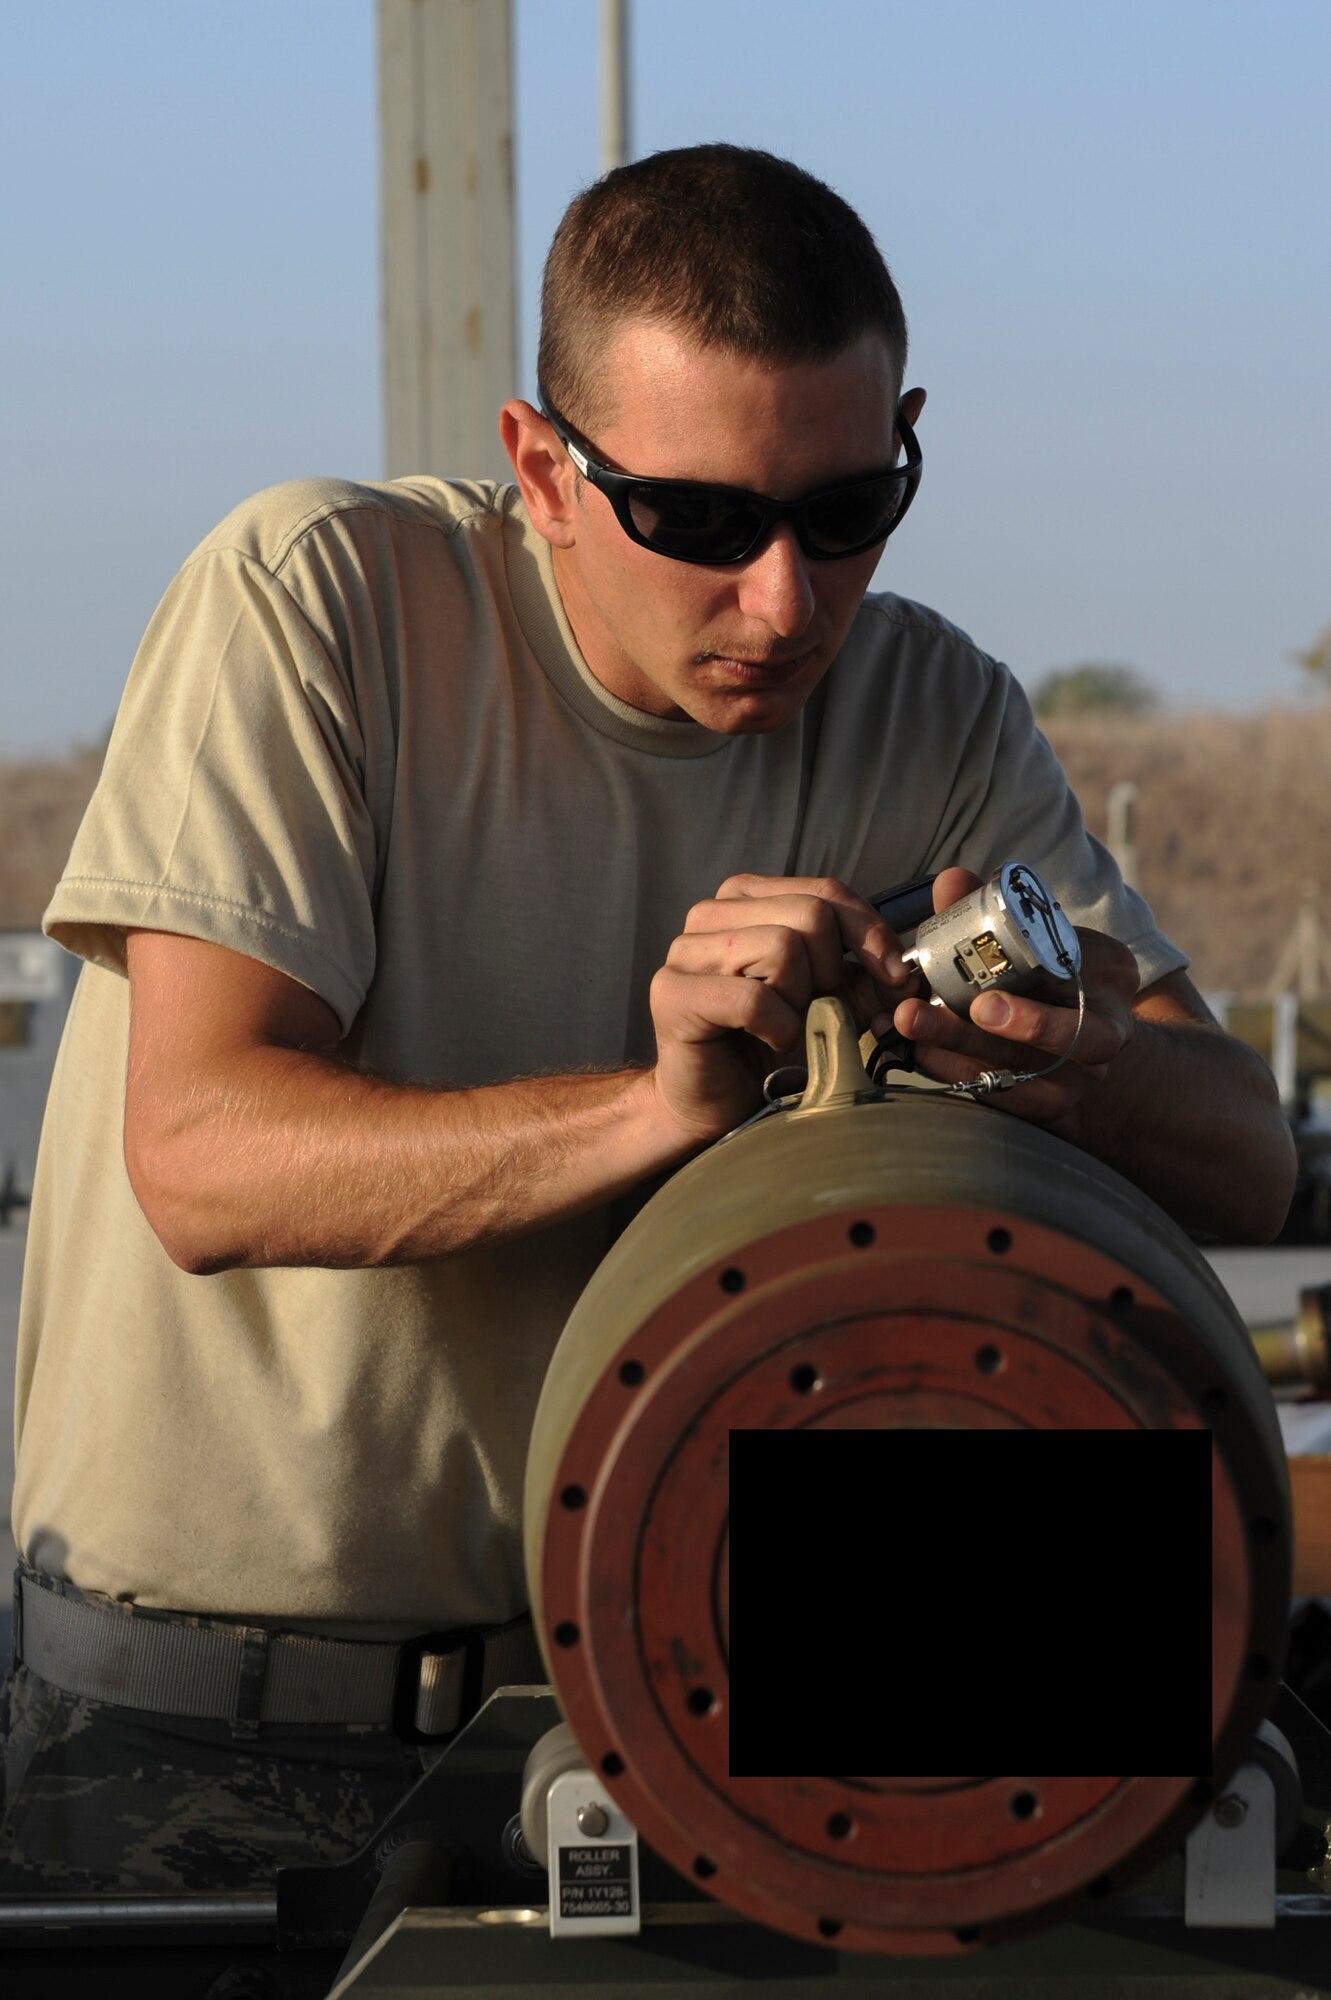 U.S. Air Force Staff Sgt. Benjamin, a 447th Expeditionary Aircraft Maintenance Squadron munitions systems journeyman, plugs in a component on a GBU-54 Laser Joint Direct Attack Munition bomb Oct. 29, 2016, at Incirlik Air Base, Turkey. The bombs built and delivered by the Airmen are used in Operation INHERENT RESOLVE. (U.S. Air Force photo by Airman 1st Class Devin M. Rumbaugh) (Portions of this image are blocked for security concerns)